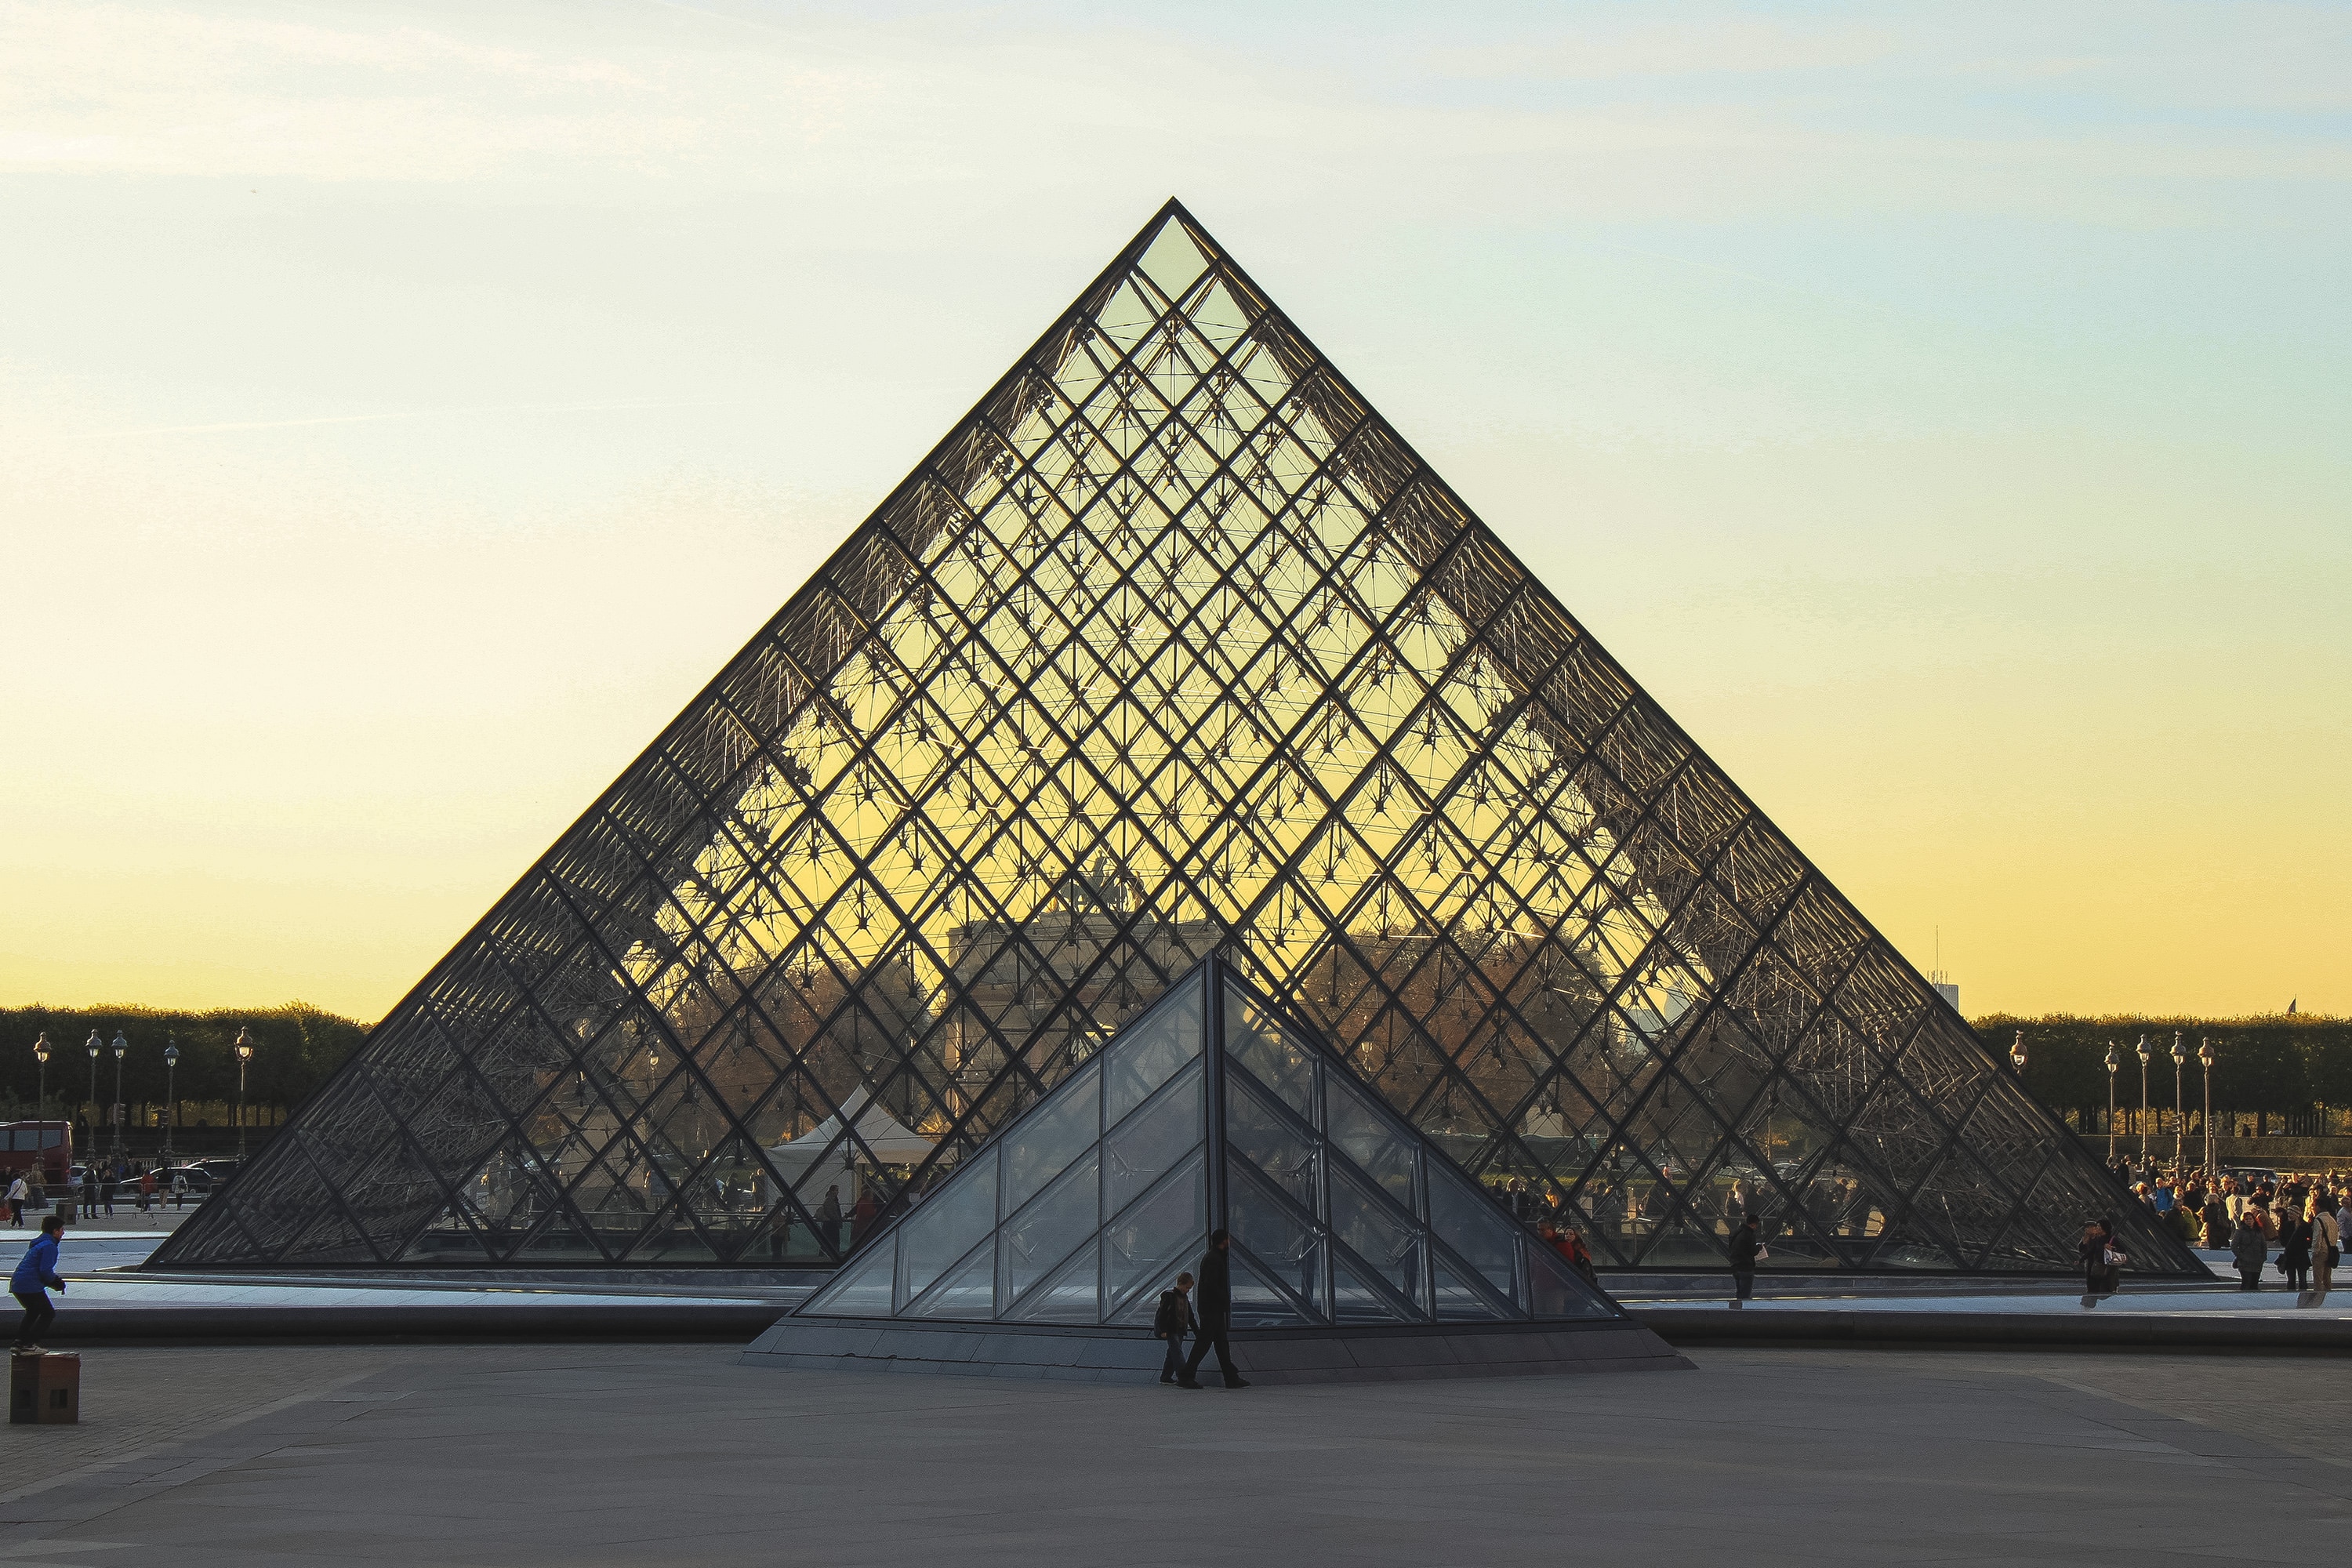 1920x1080 wallpaper | louvre pyramid photograph during sunset | Peakpx